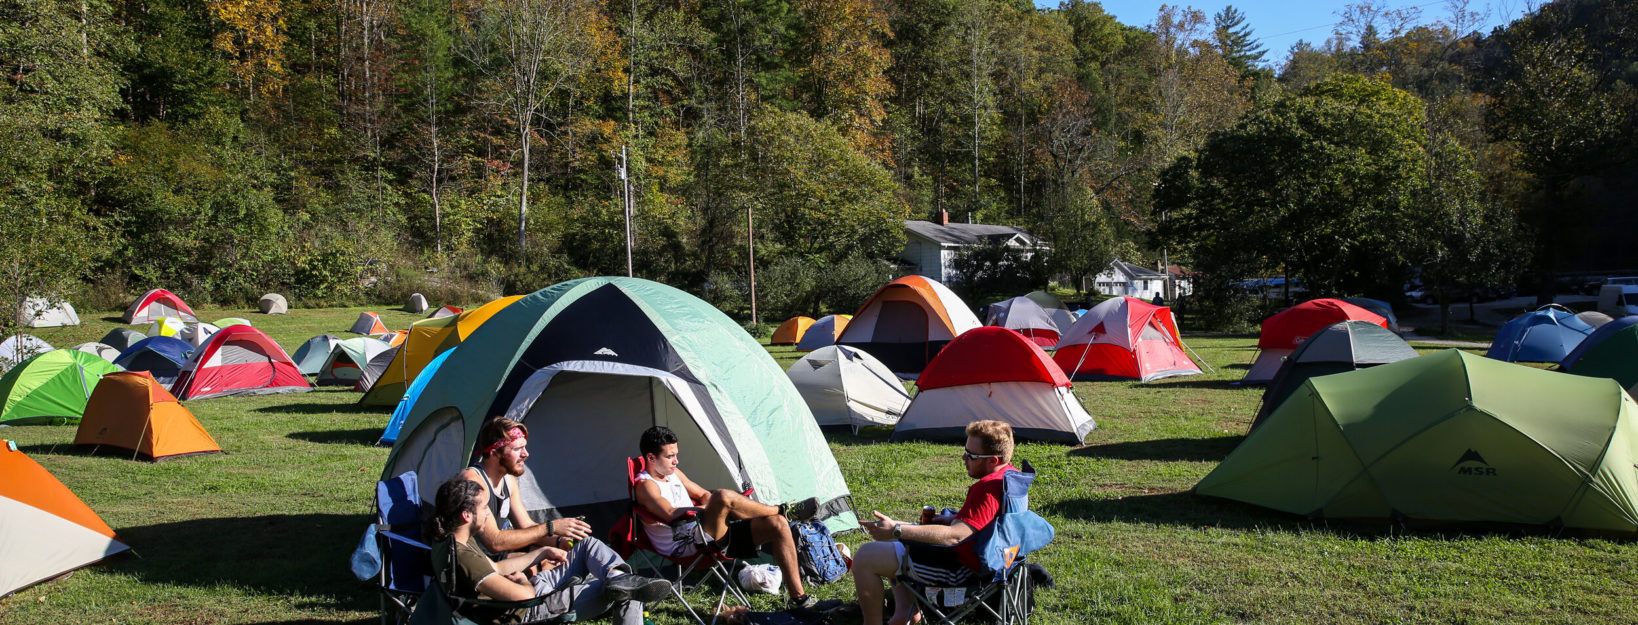 Climbers camp among a sea of tents at Miguel's in Slade, Ky near the Red River Gorge